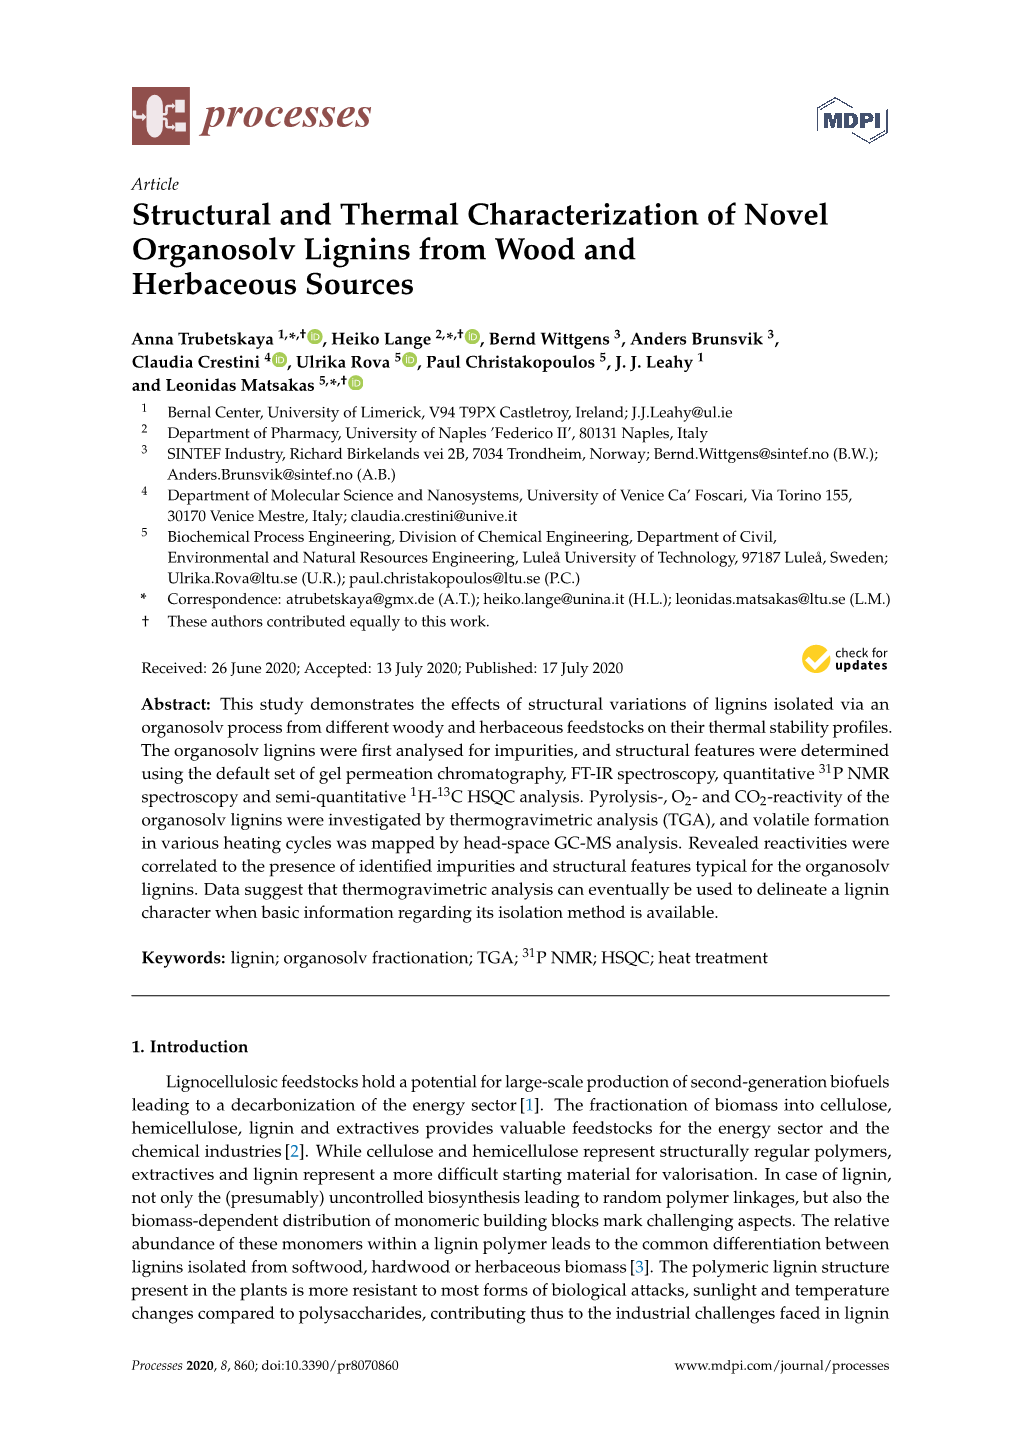 Structural and Thermal Characterization of Novel Organosolv Lignins from Wood and Herbaceous Sources